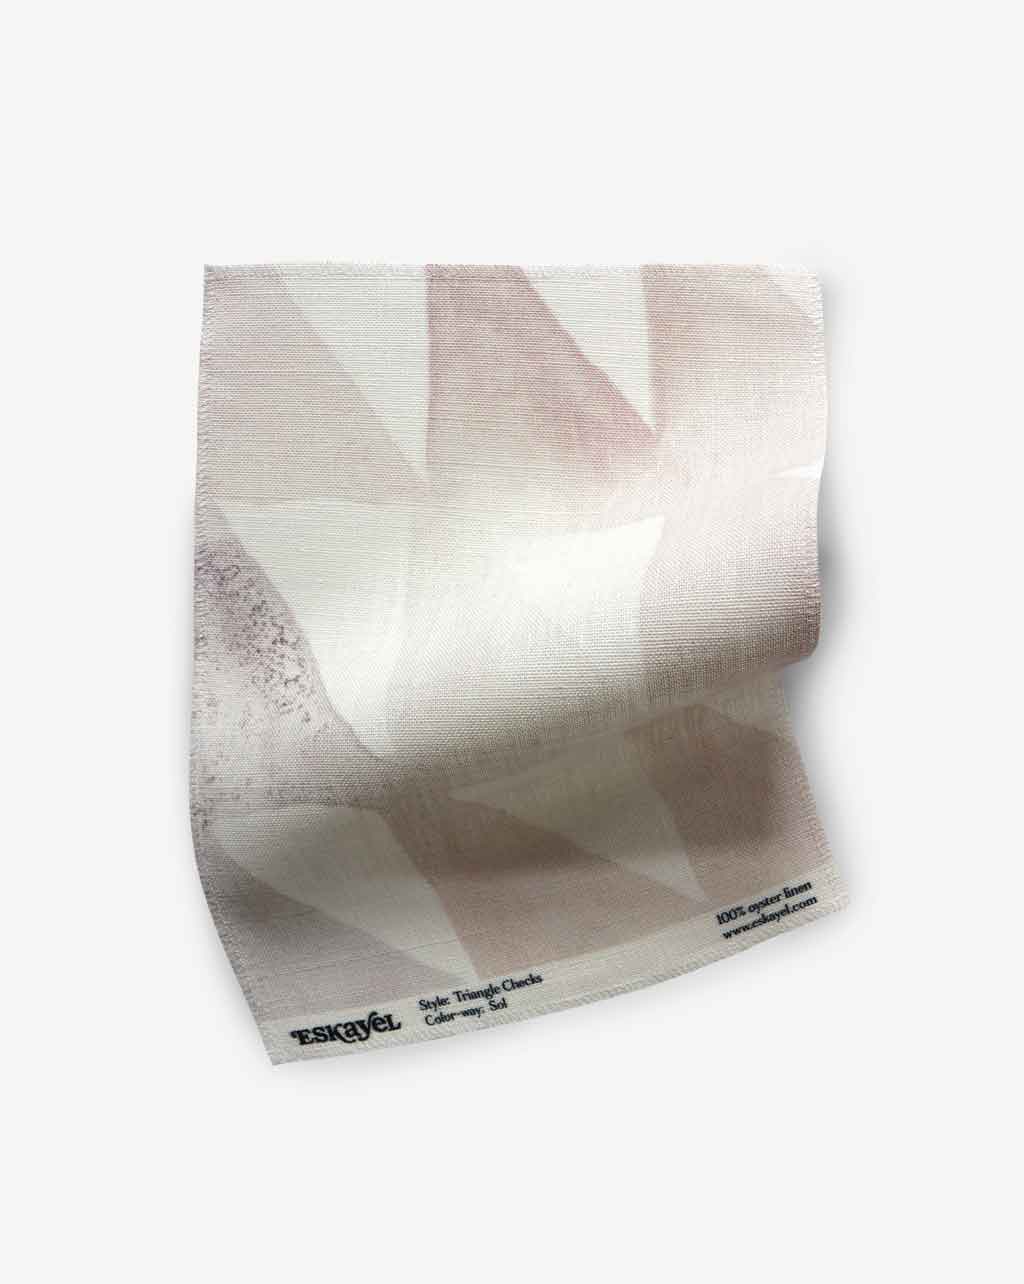 A Triangle Checks Fabric Sample with a pink and white pattern on it